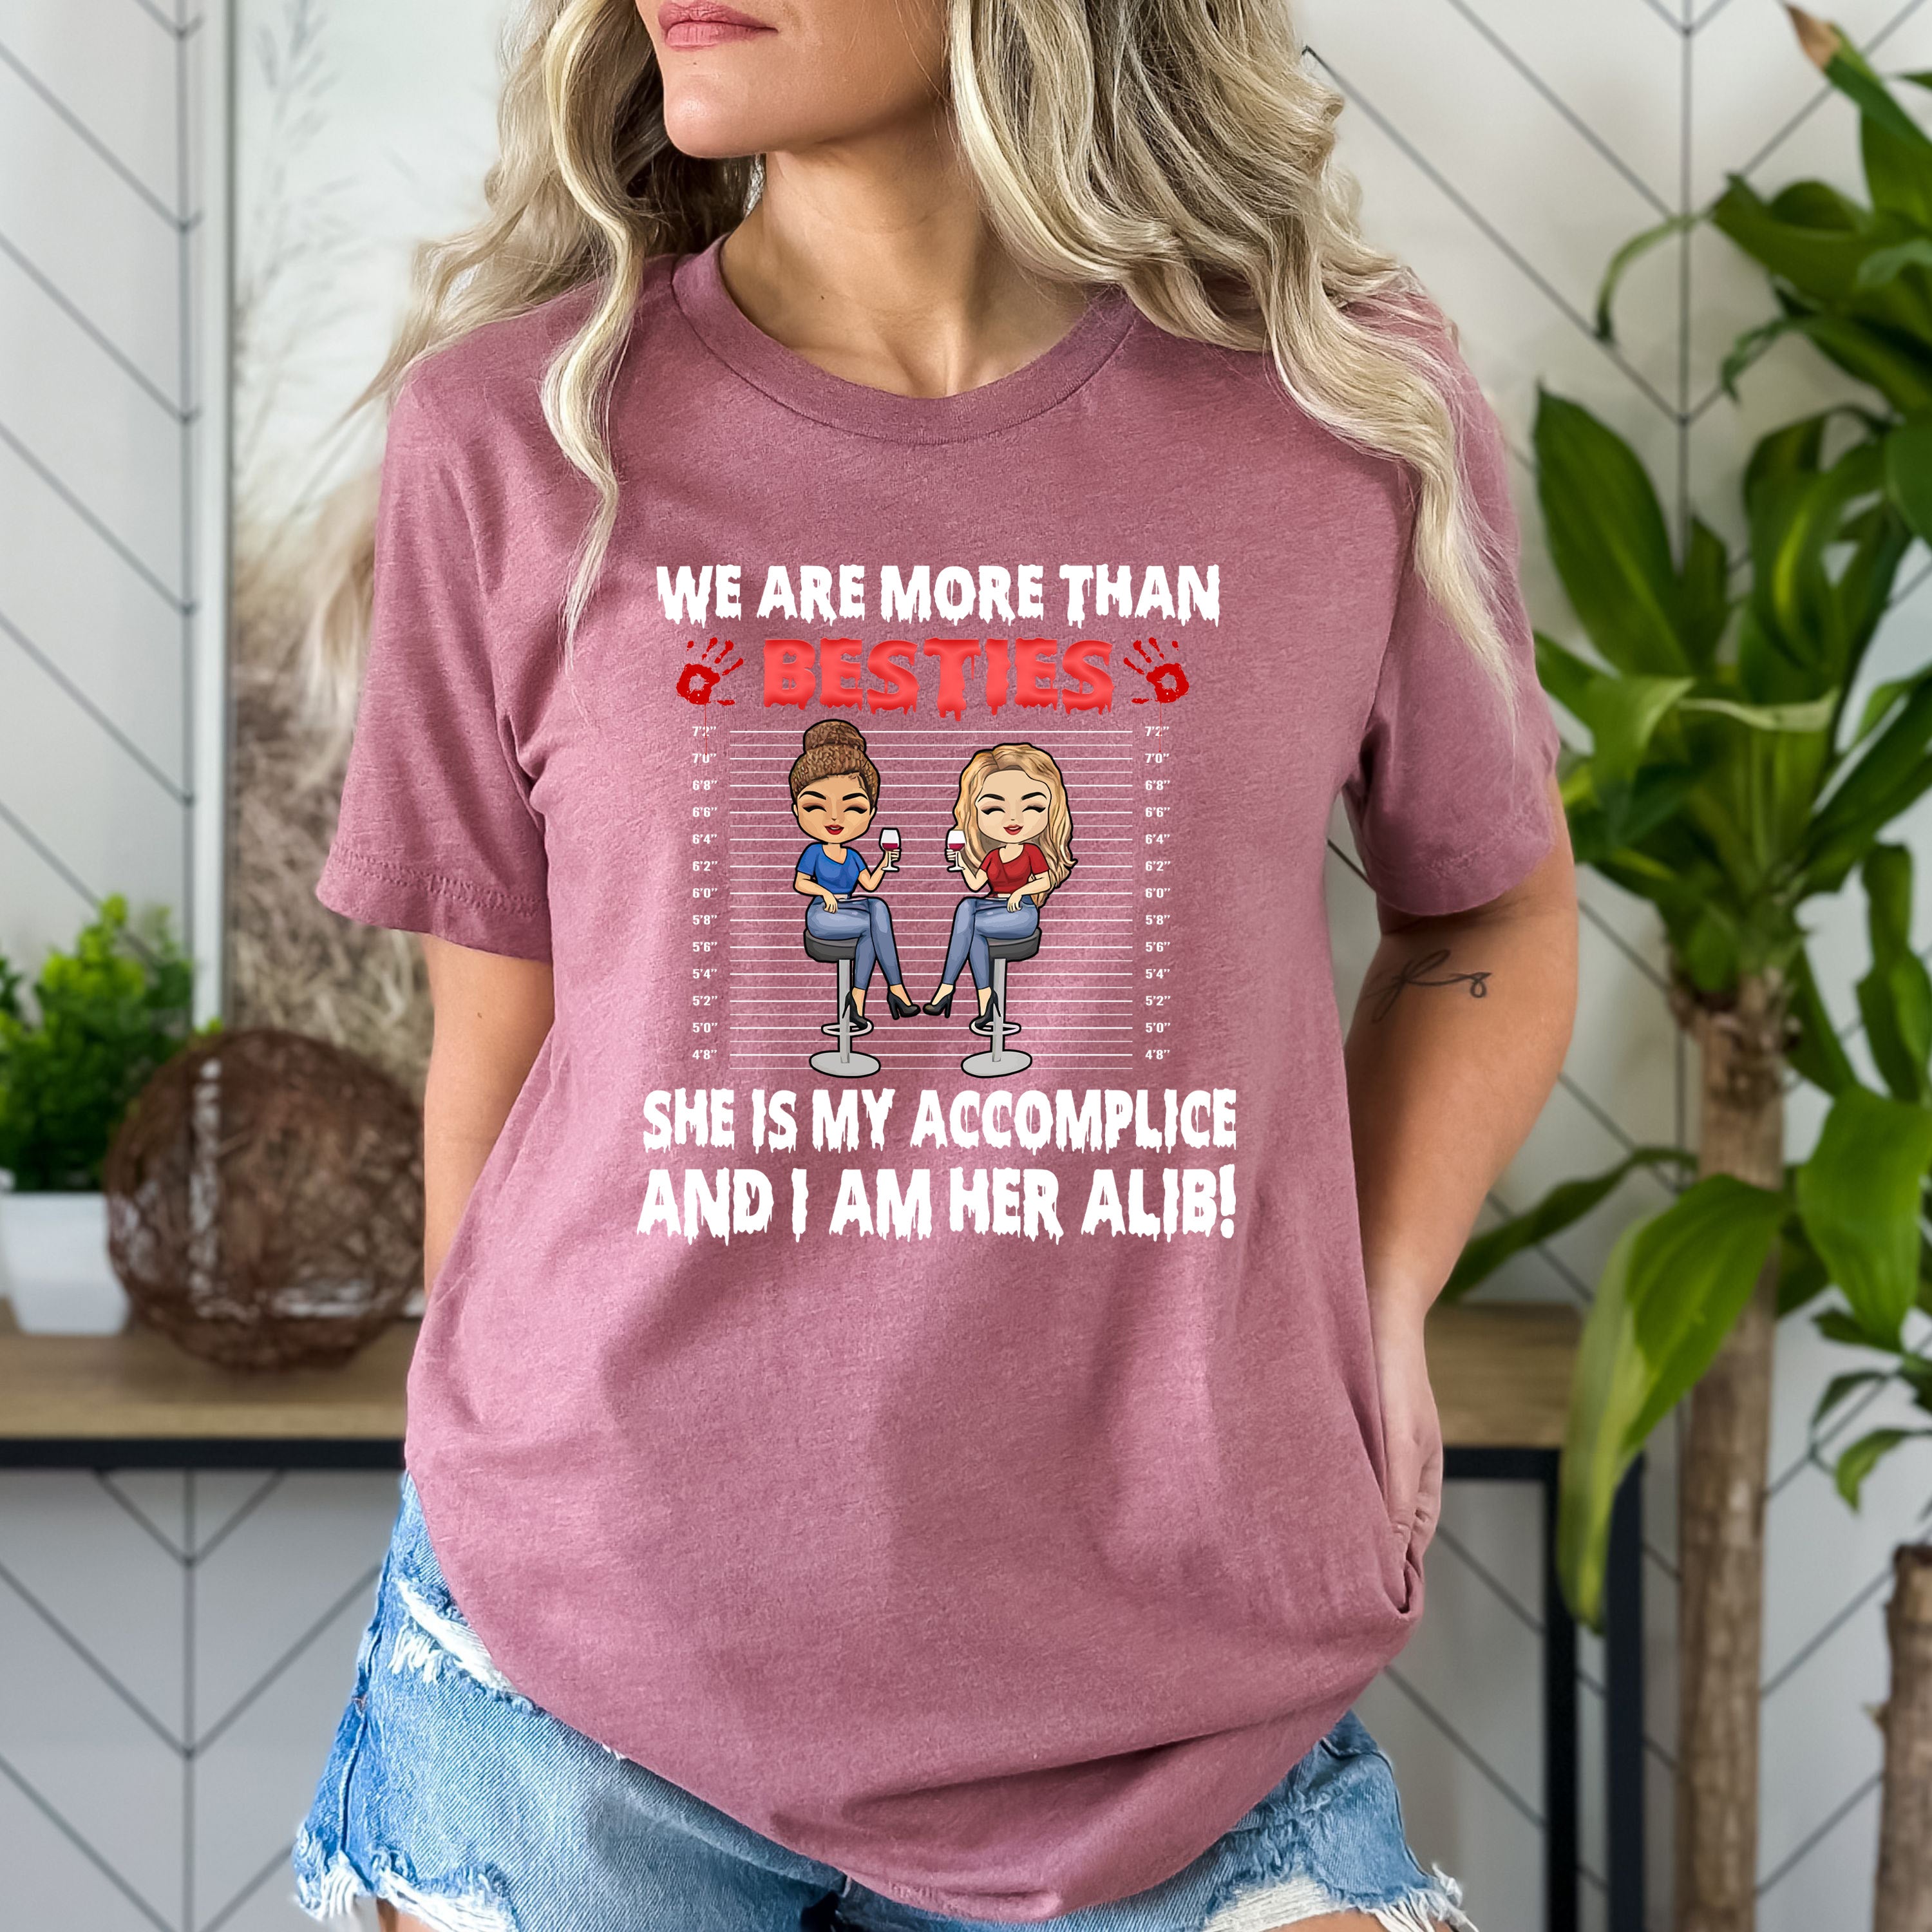 We Are More Than Besties - Bella Canvas